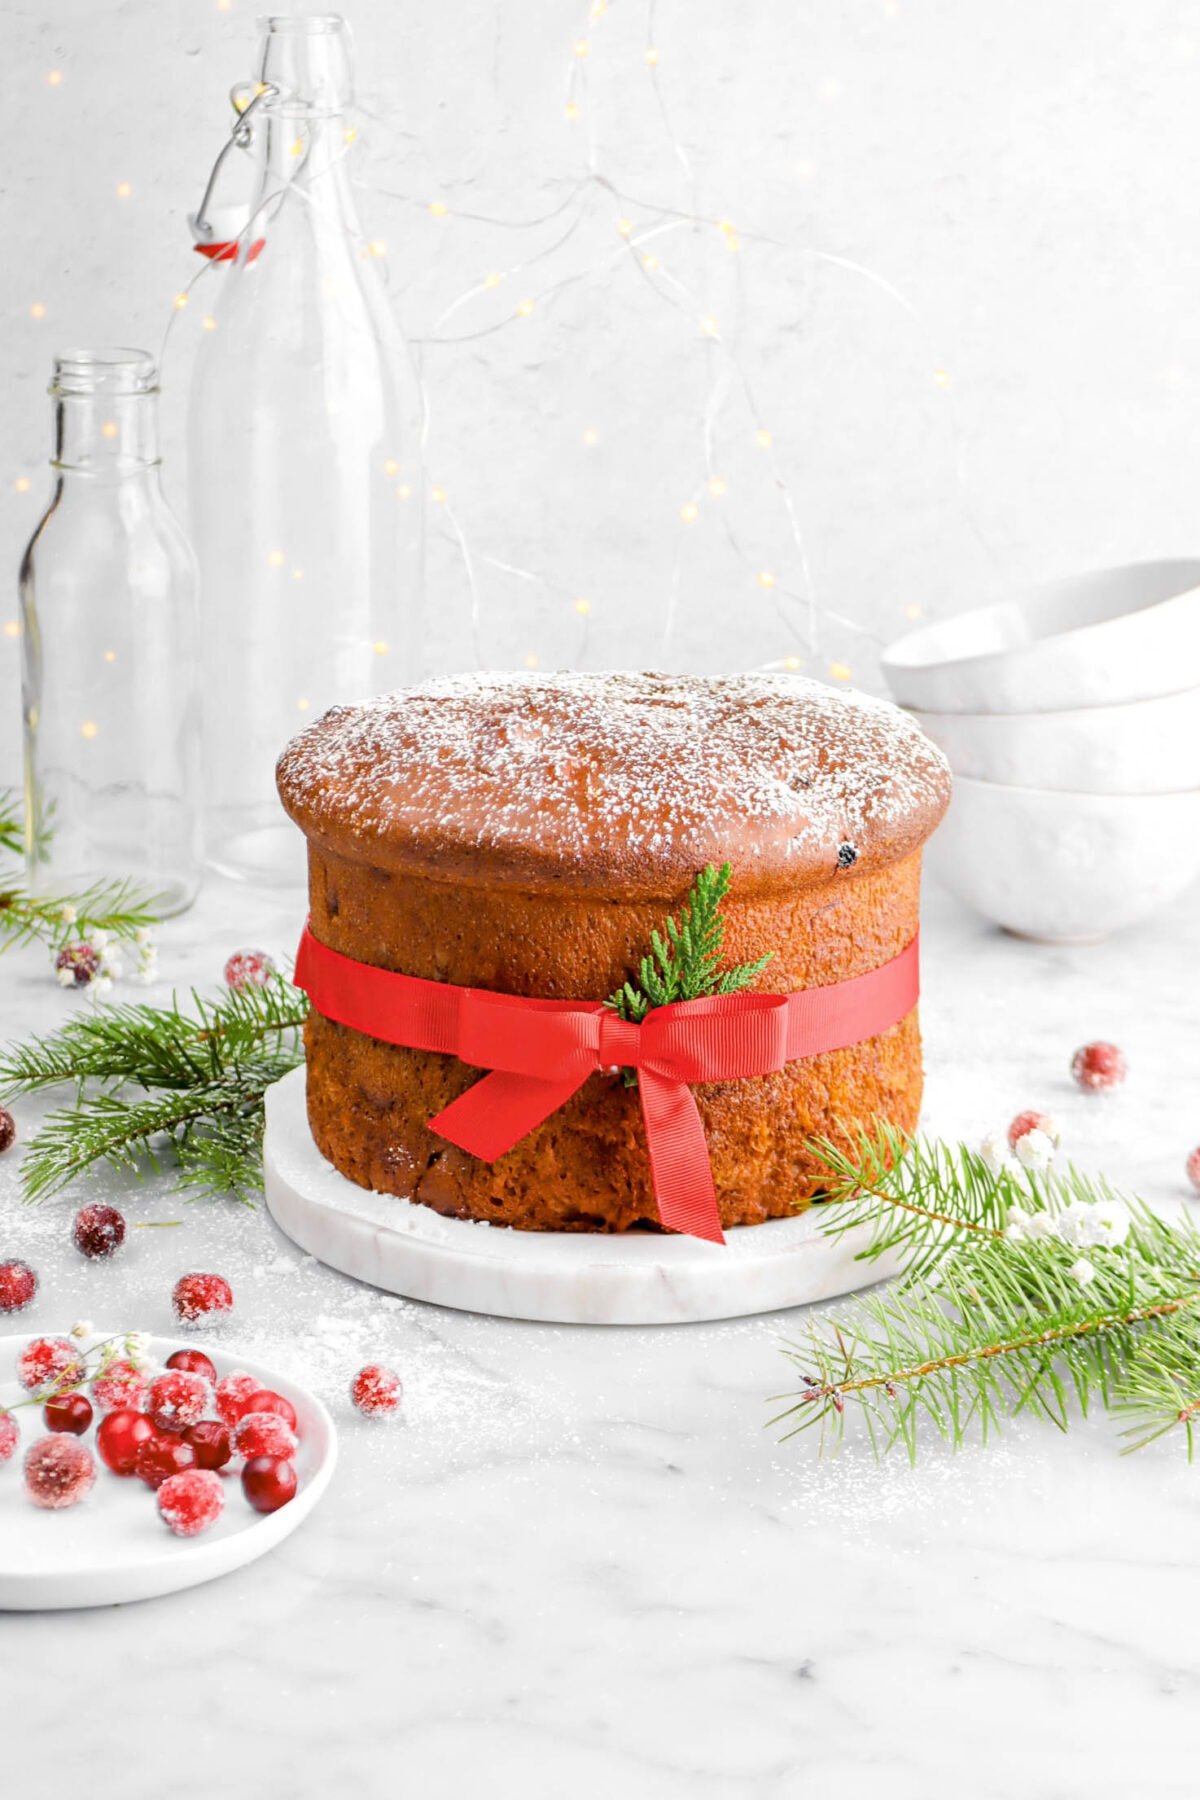 panettone dusted lightly with powdered sugar and wrapped in red ribbon with small bow on marble stand with pine greenery around and sugared cranberries on marble surface with stack of coffee mugs and string lights behind.